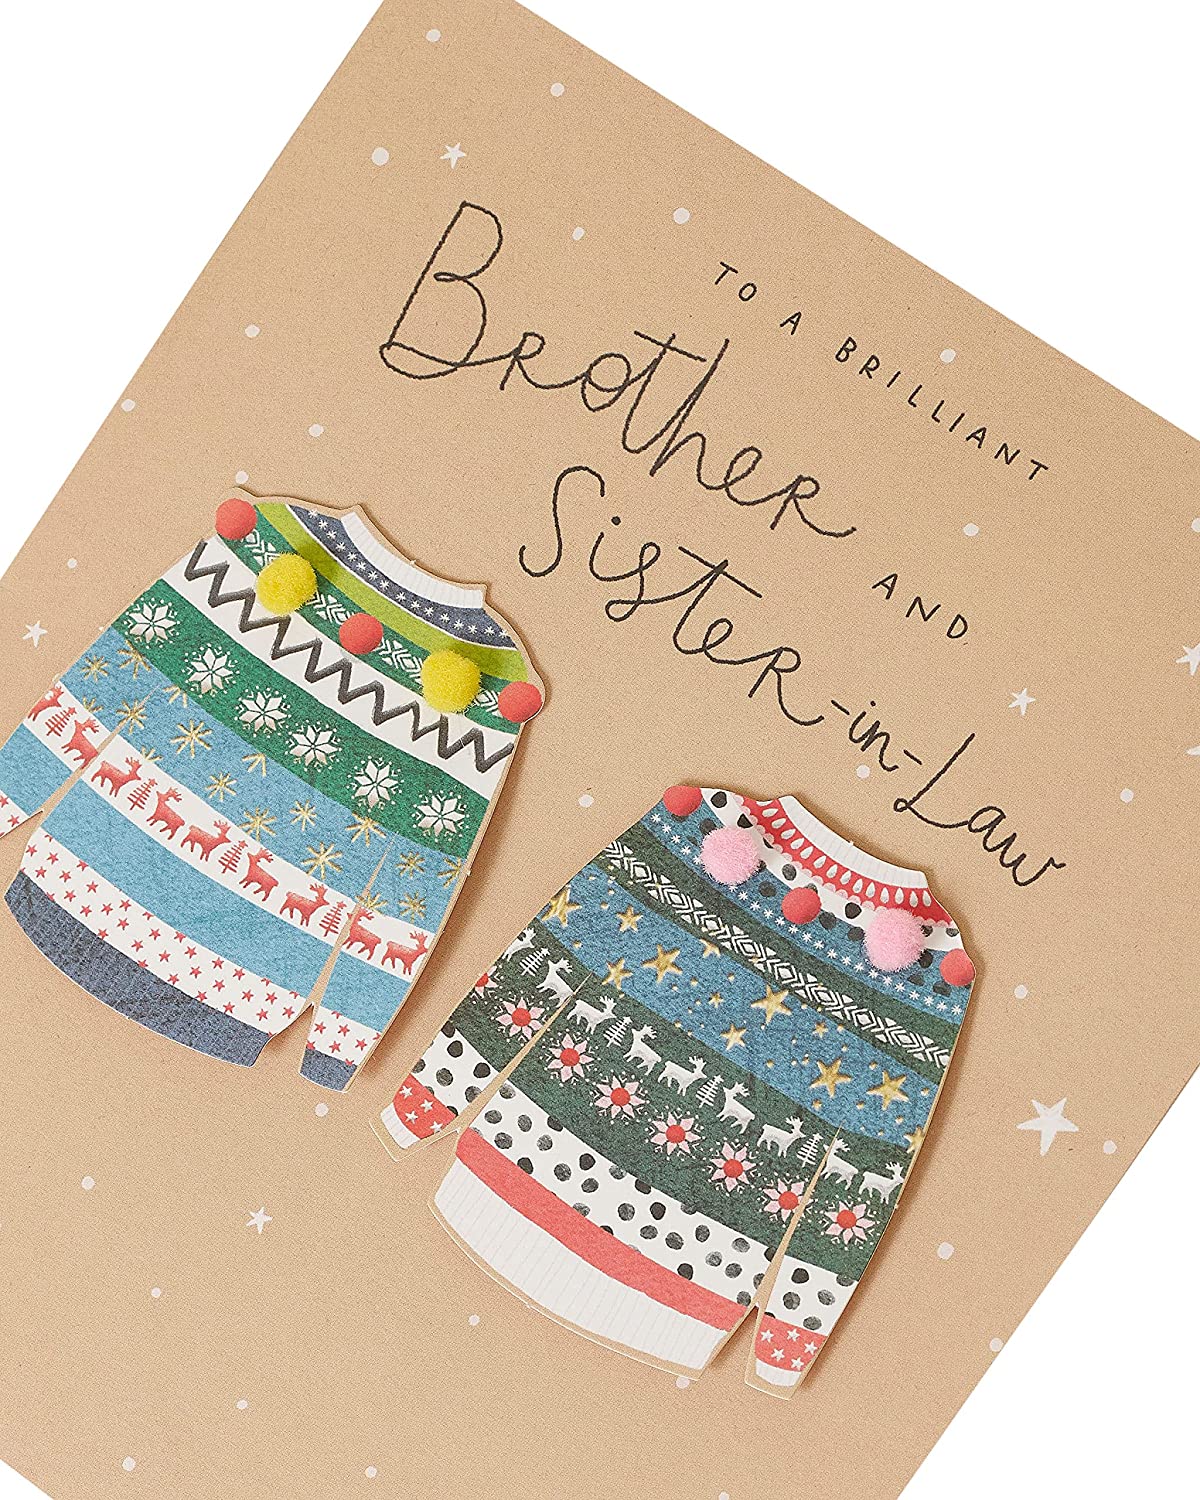 Brother and Sister-in-Law Christmas Card Jumper Design 